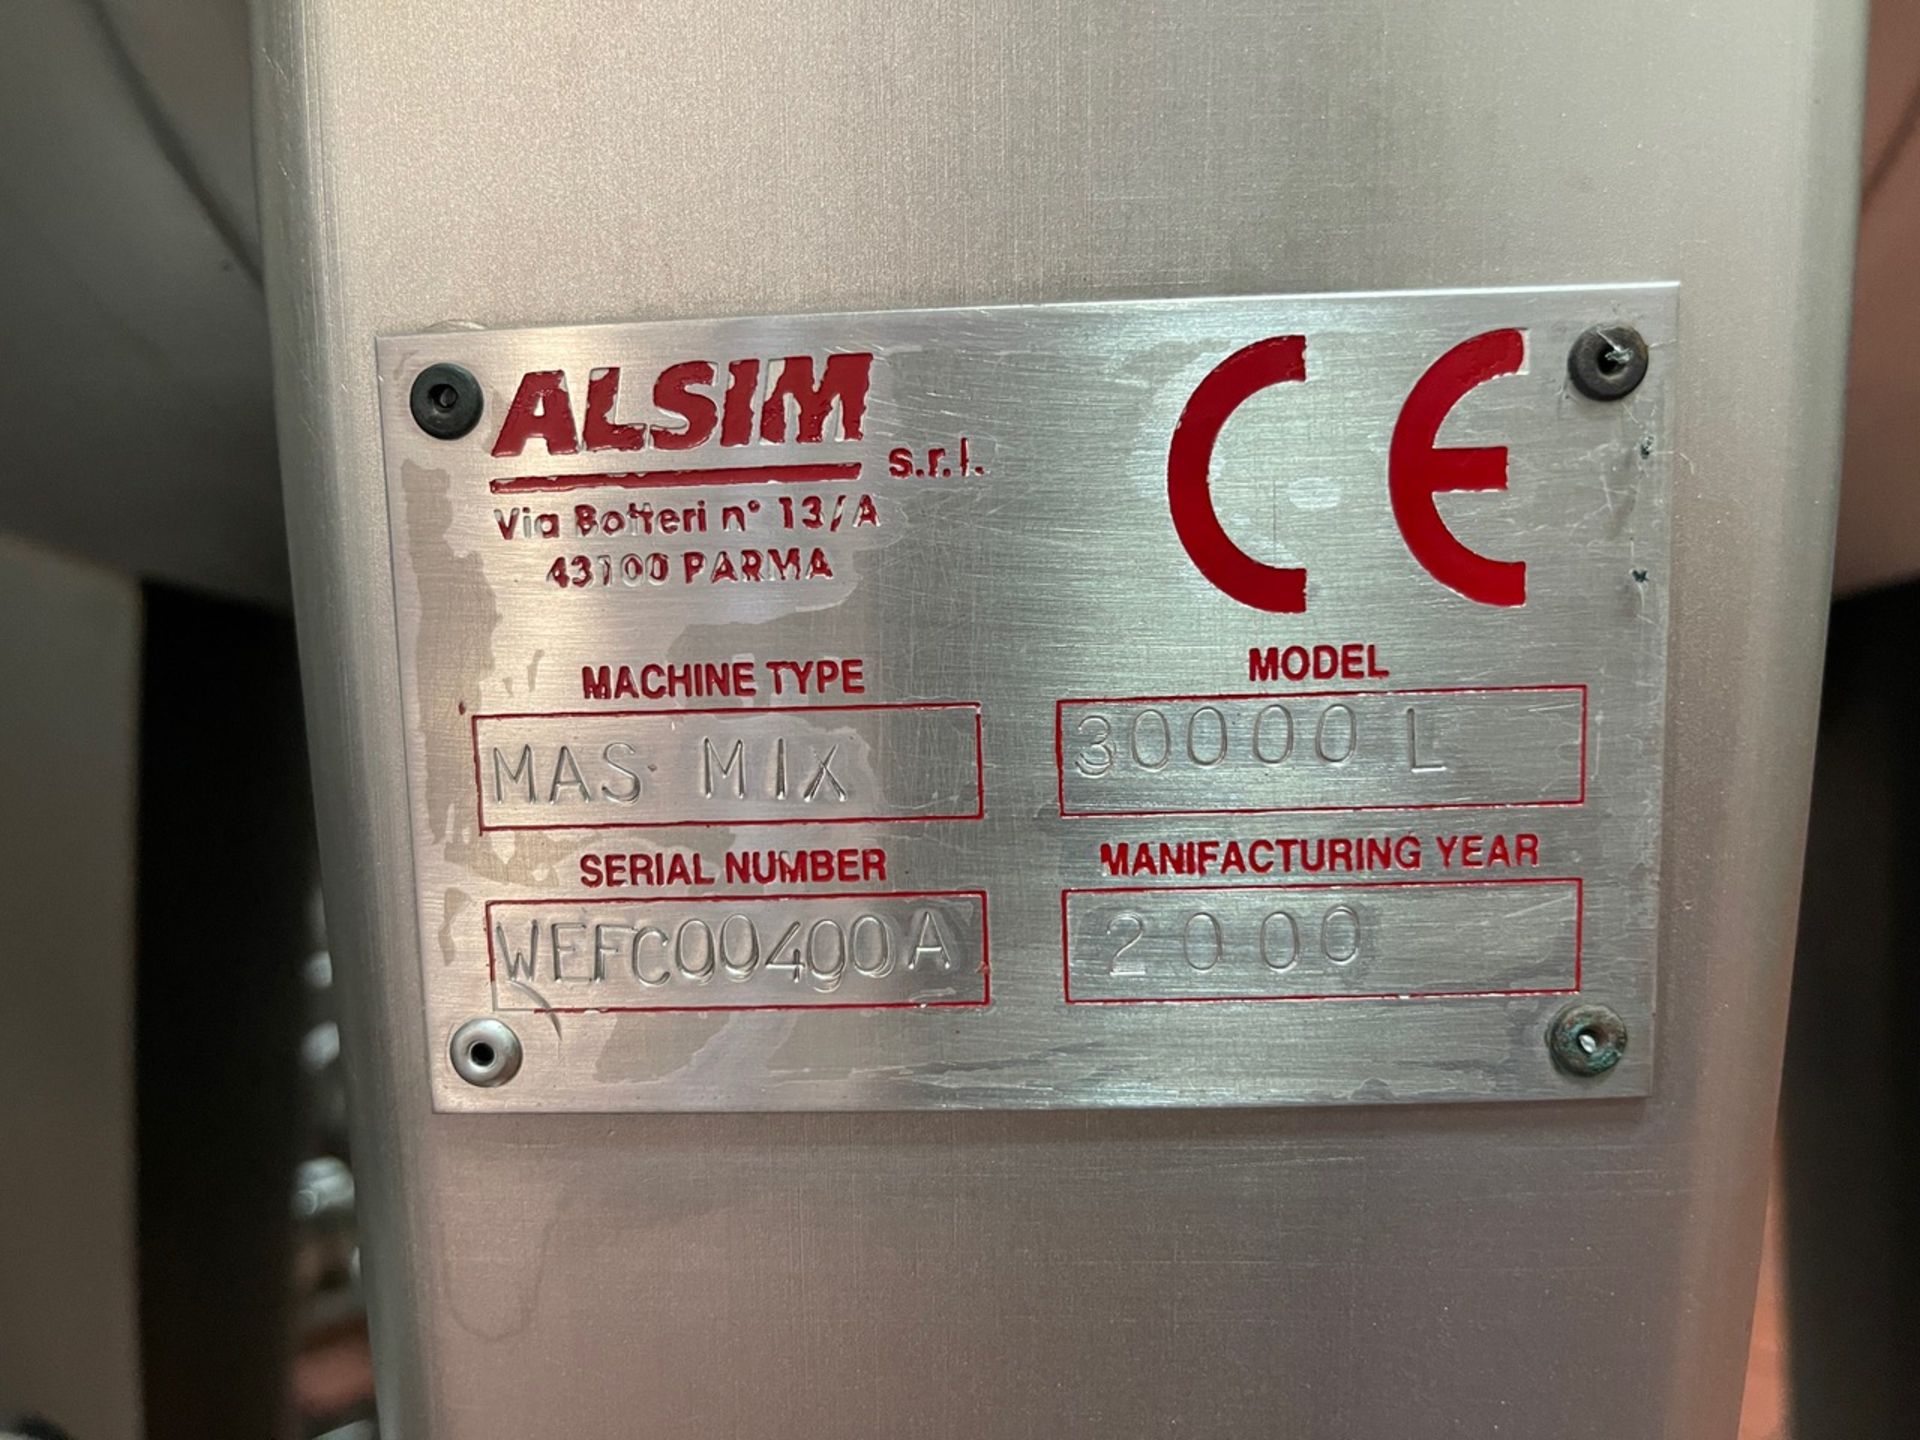 Sidel Alsim High Speed Continuous Softdrink Blending System - Model MAS MIX 30000L | Rig Fee $2000 - Image 6 of 10